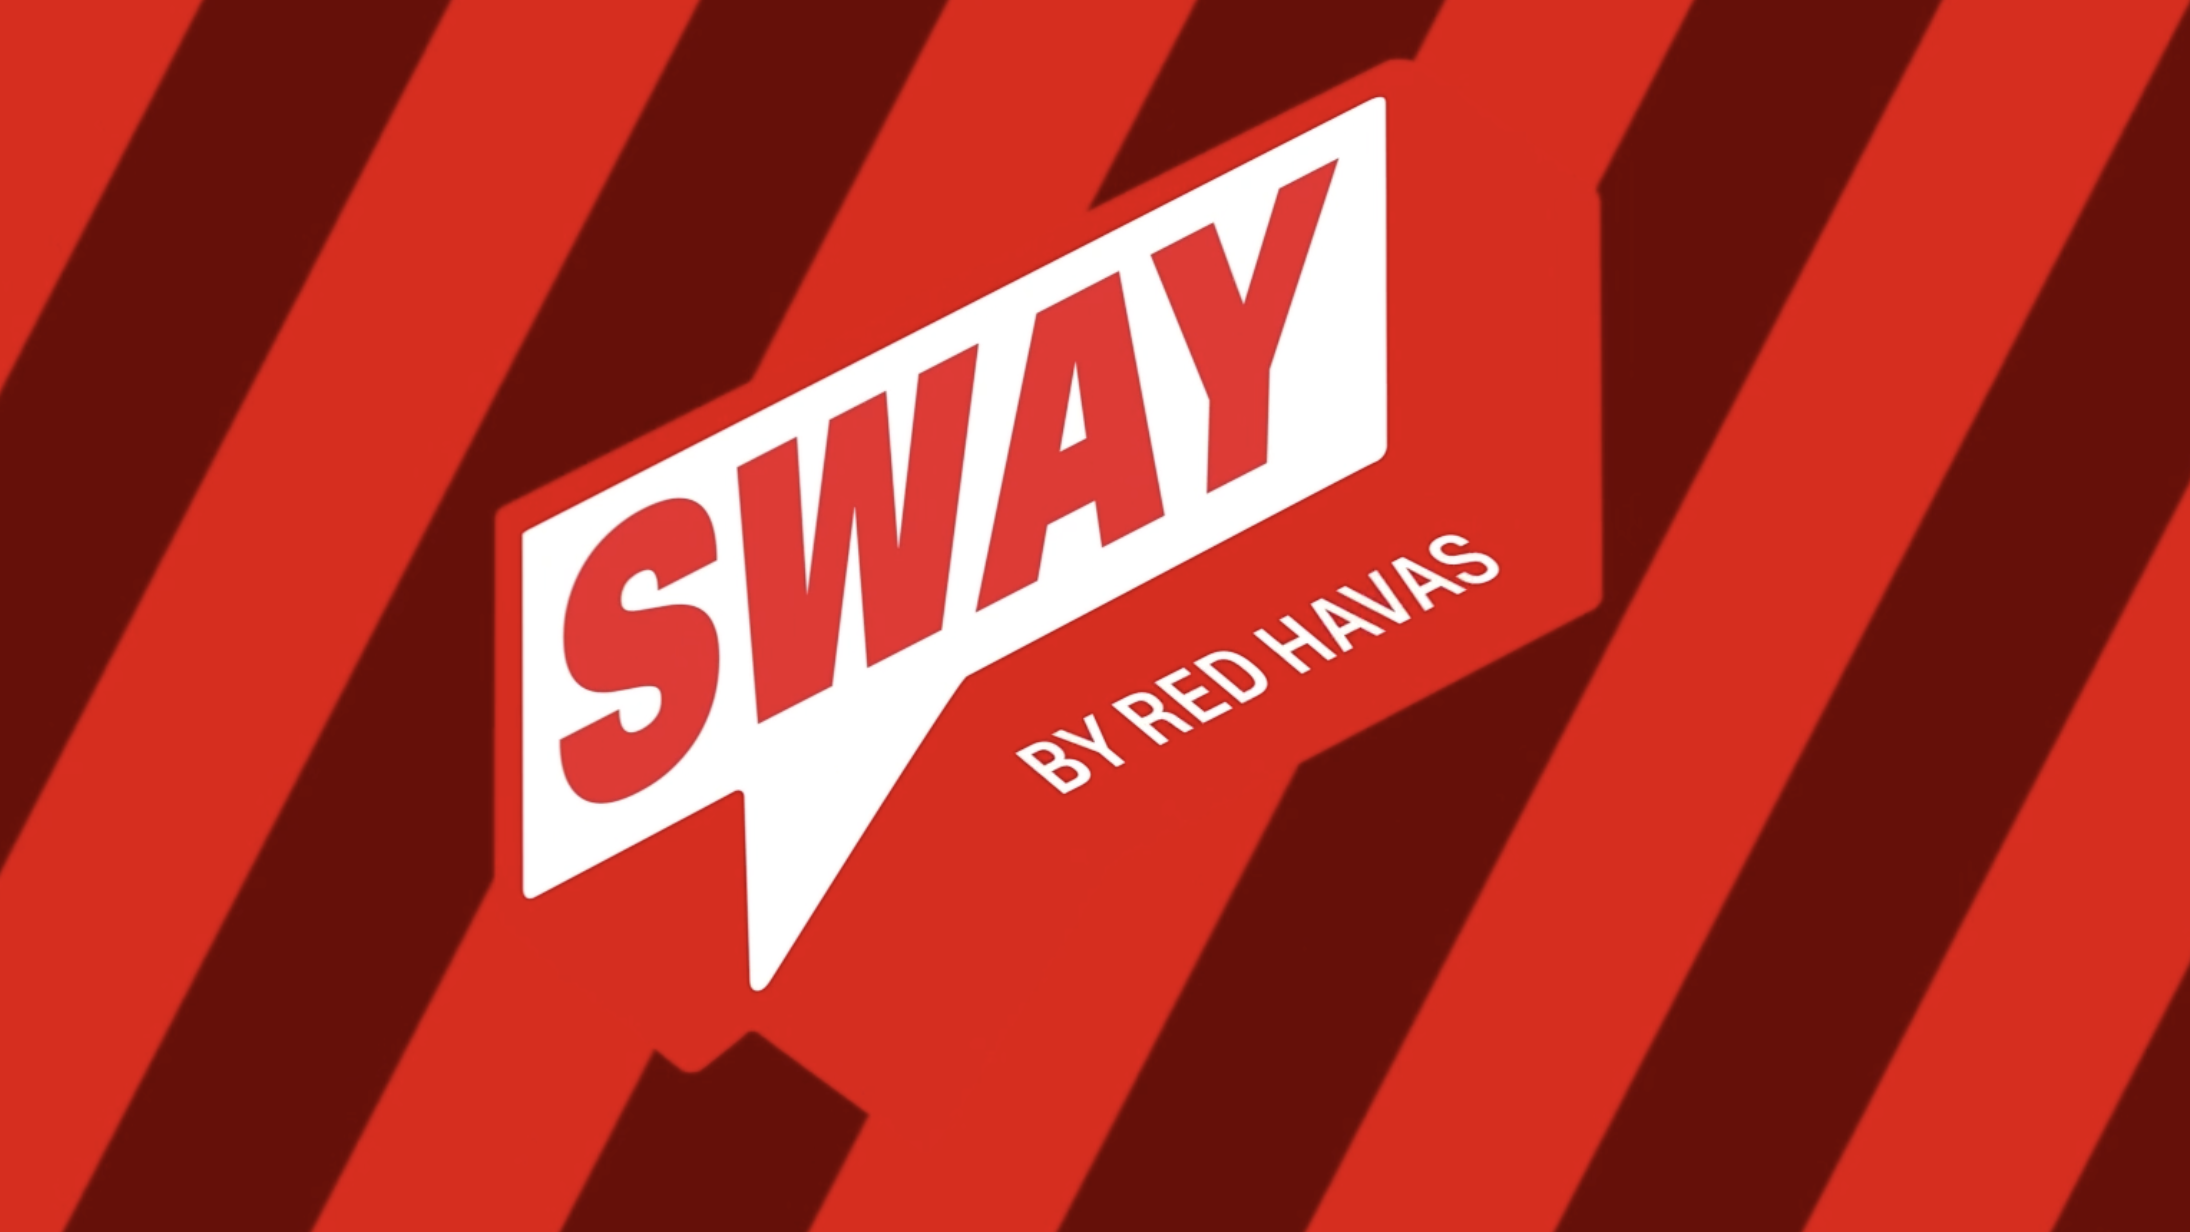 Red Havas Launches SWAY - A Global Practice For Influencer Marketing